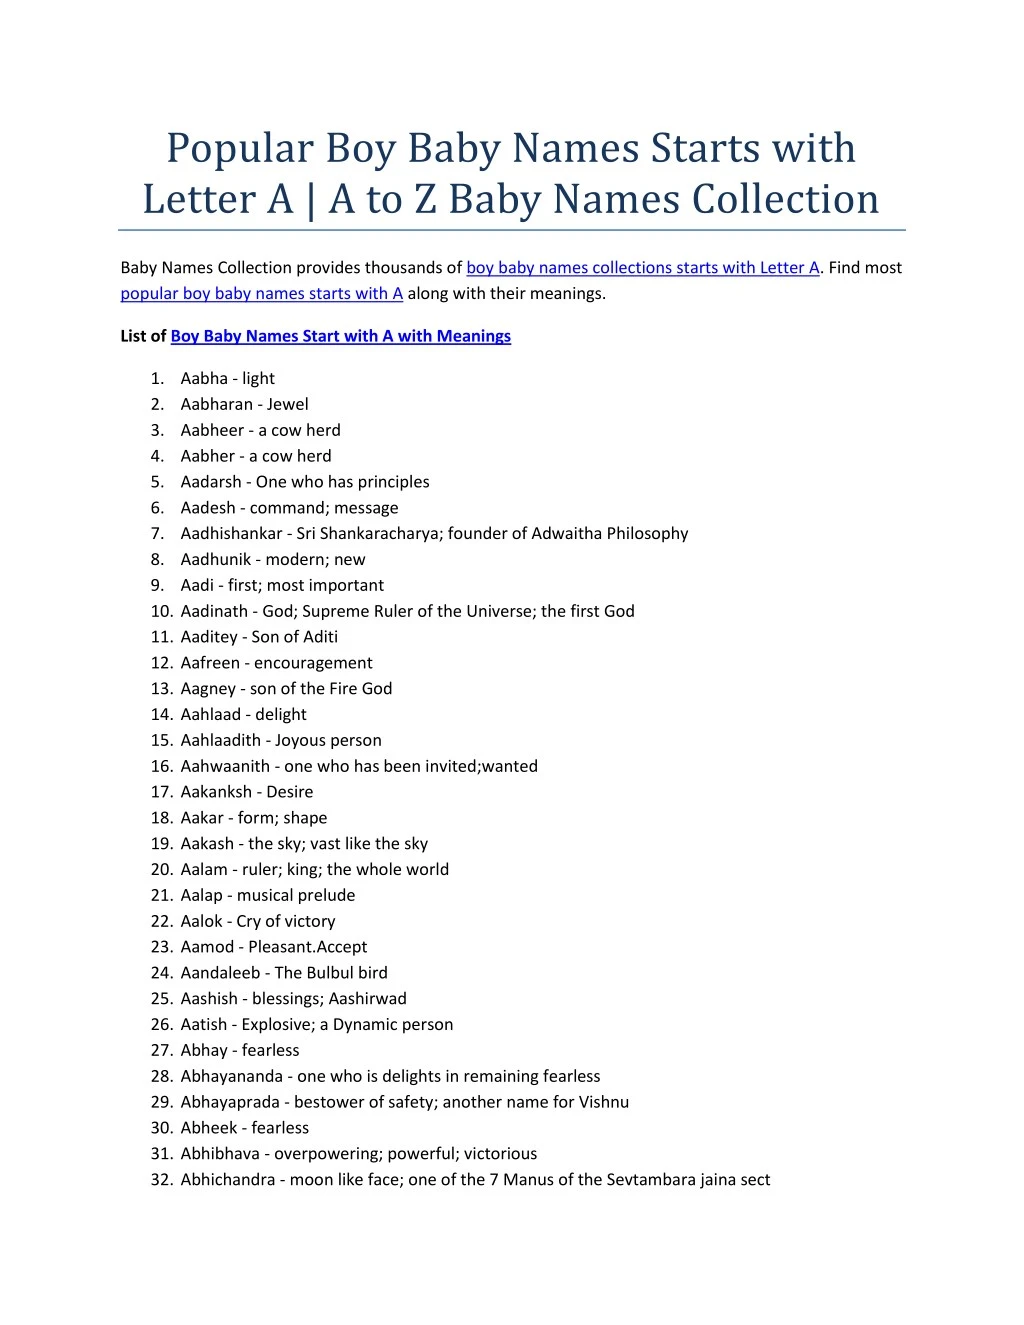 popular boy baby names starts with letter n.